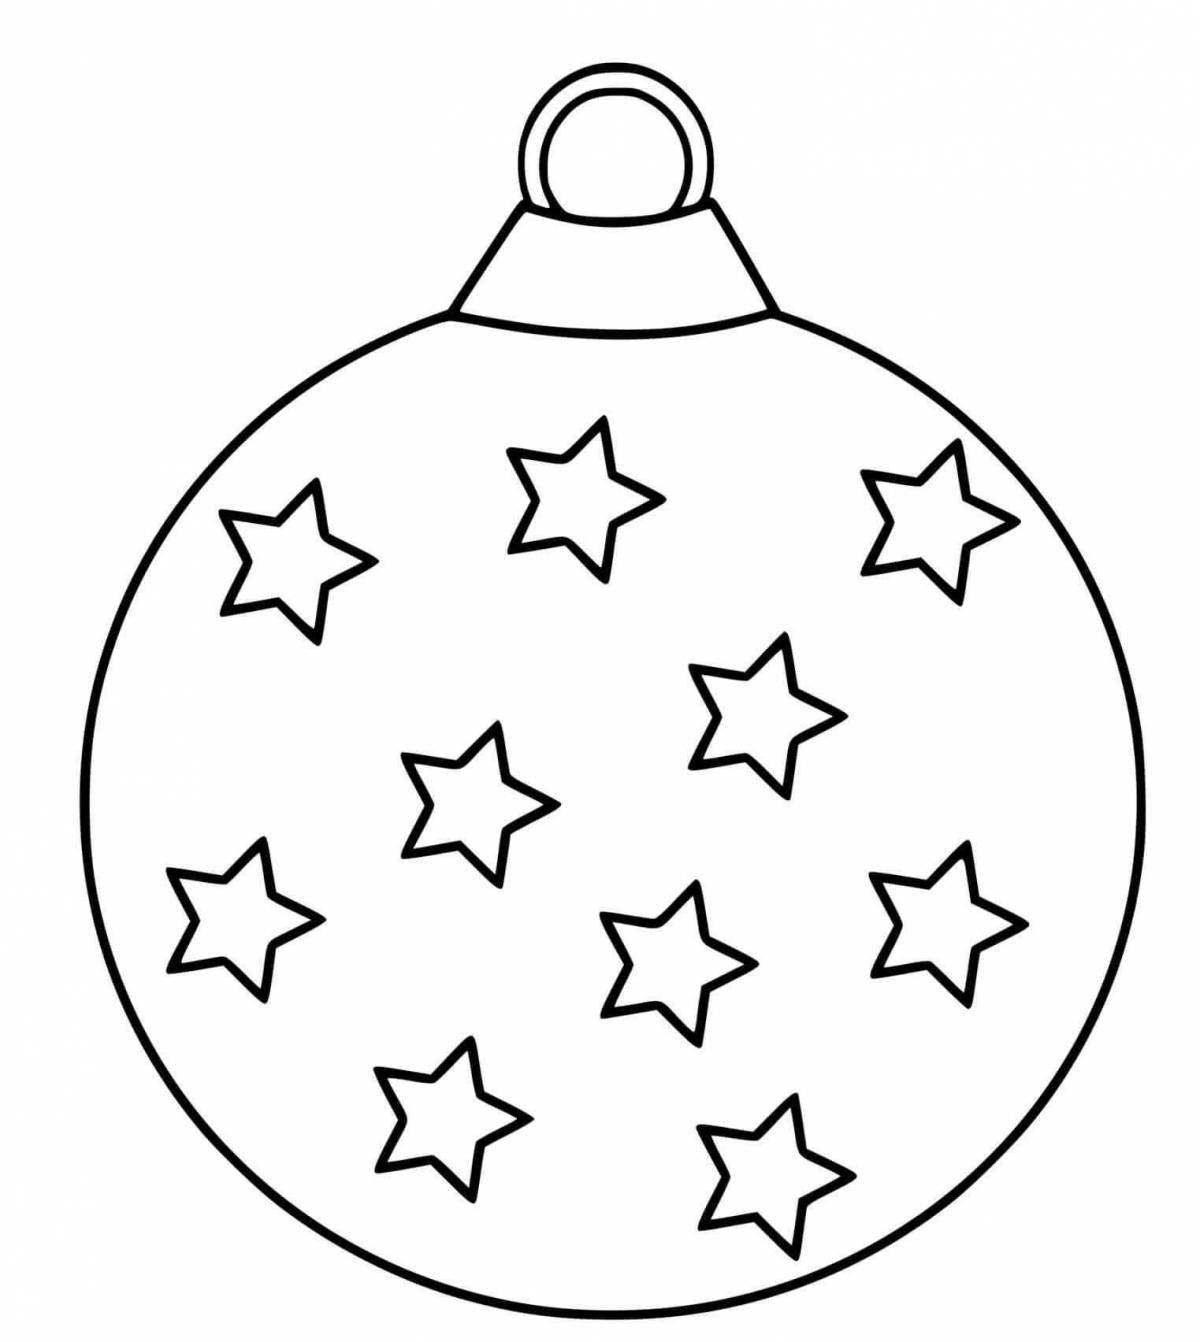 Exquisite Christmas ball coloring book for kids